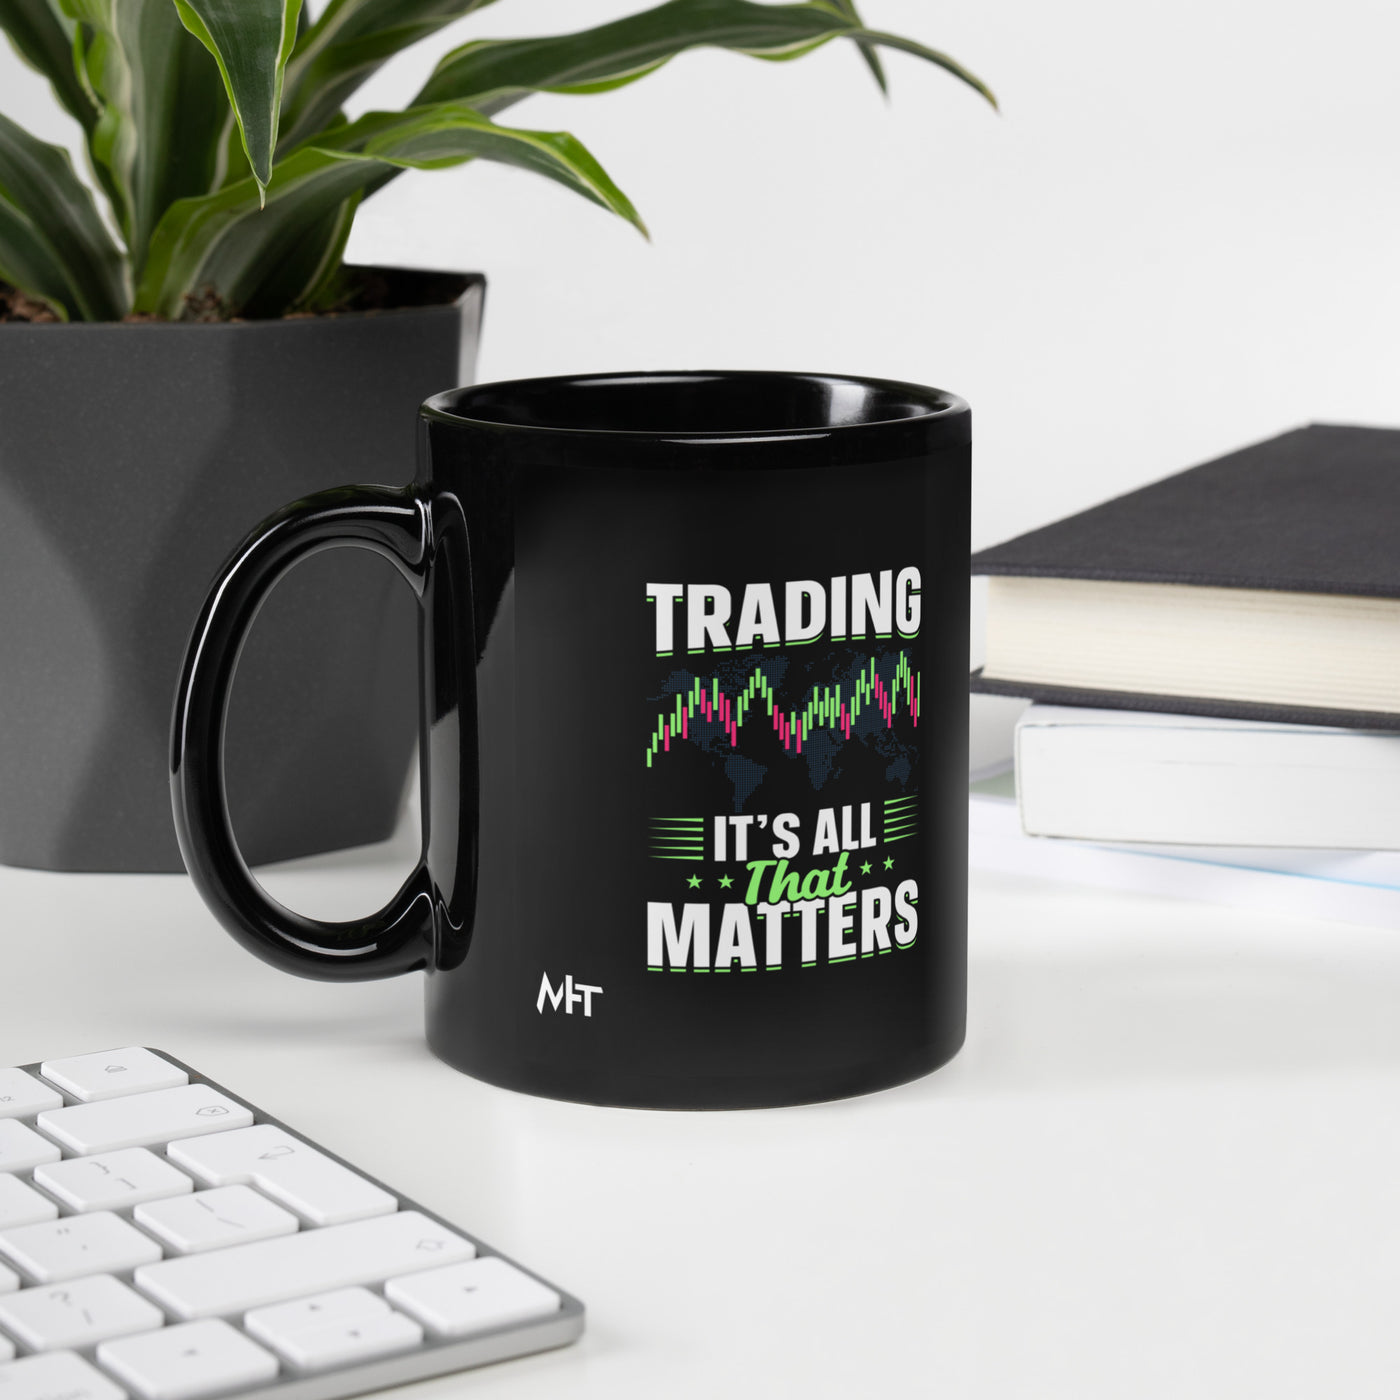 Trading it is all that matters - Black Glossy Mug